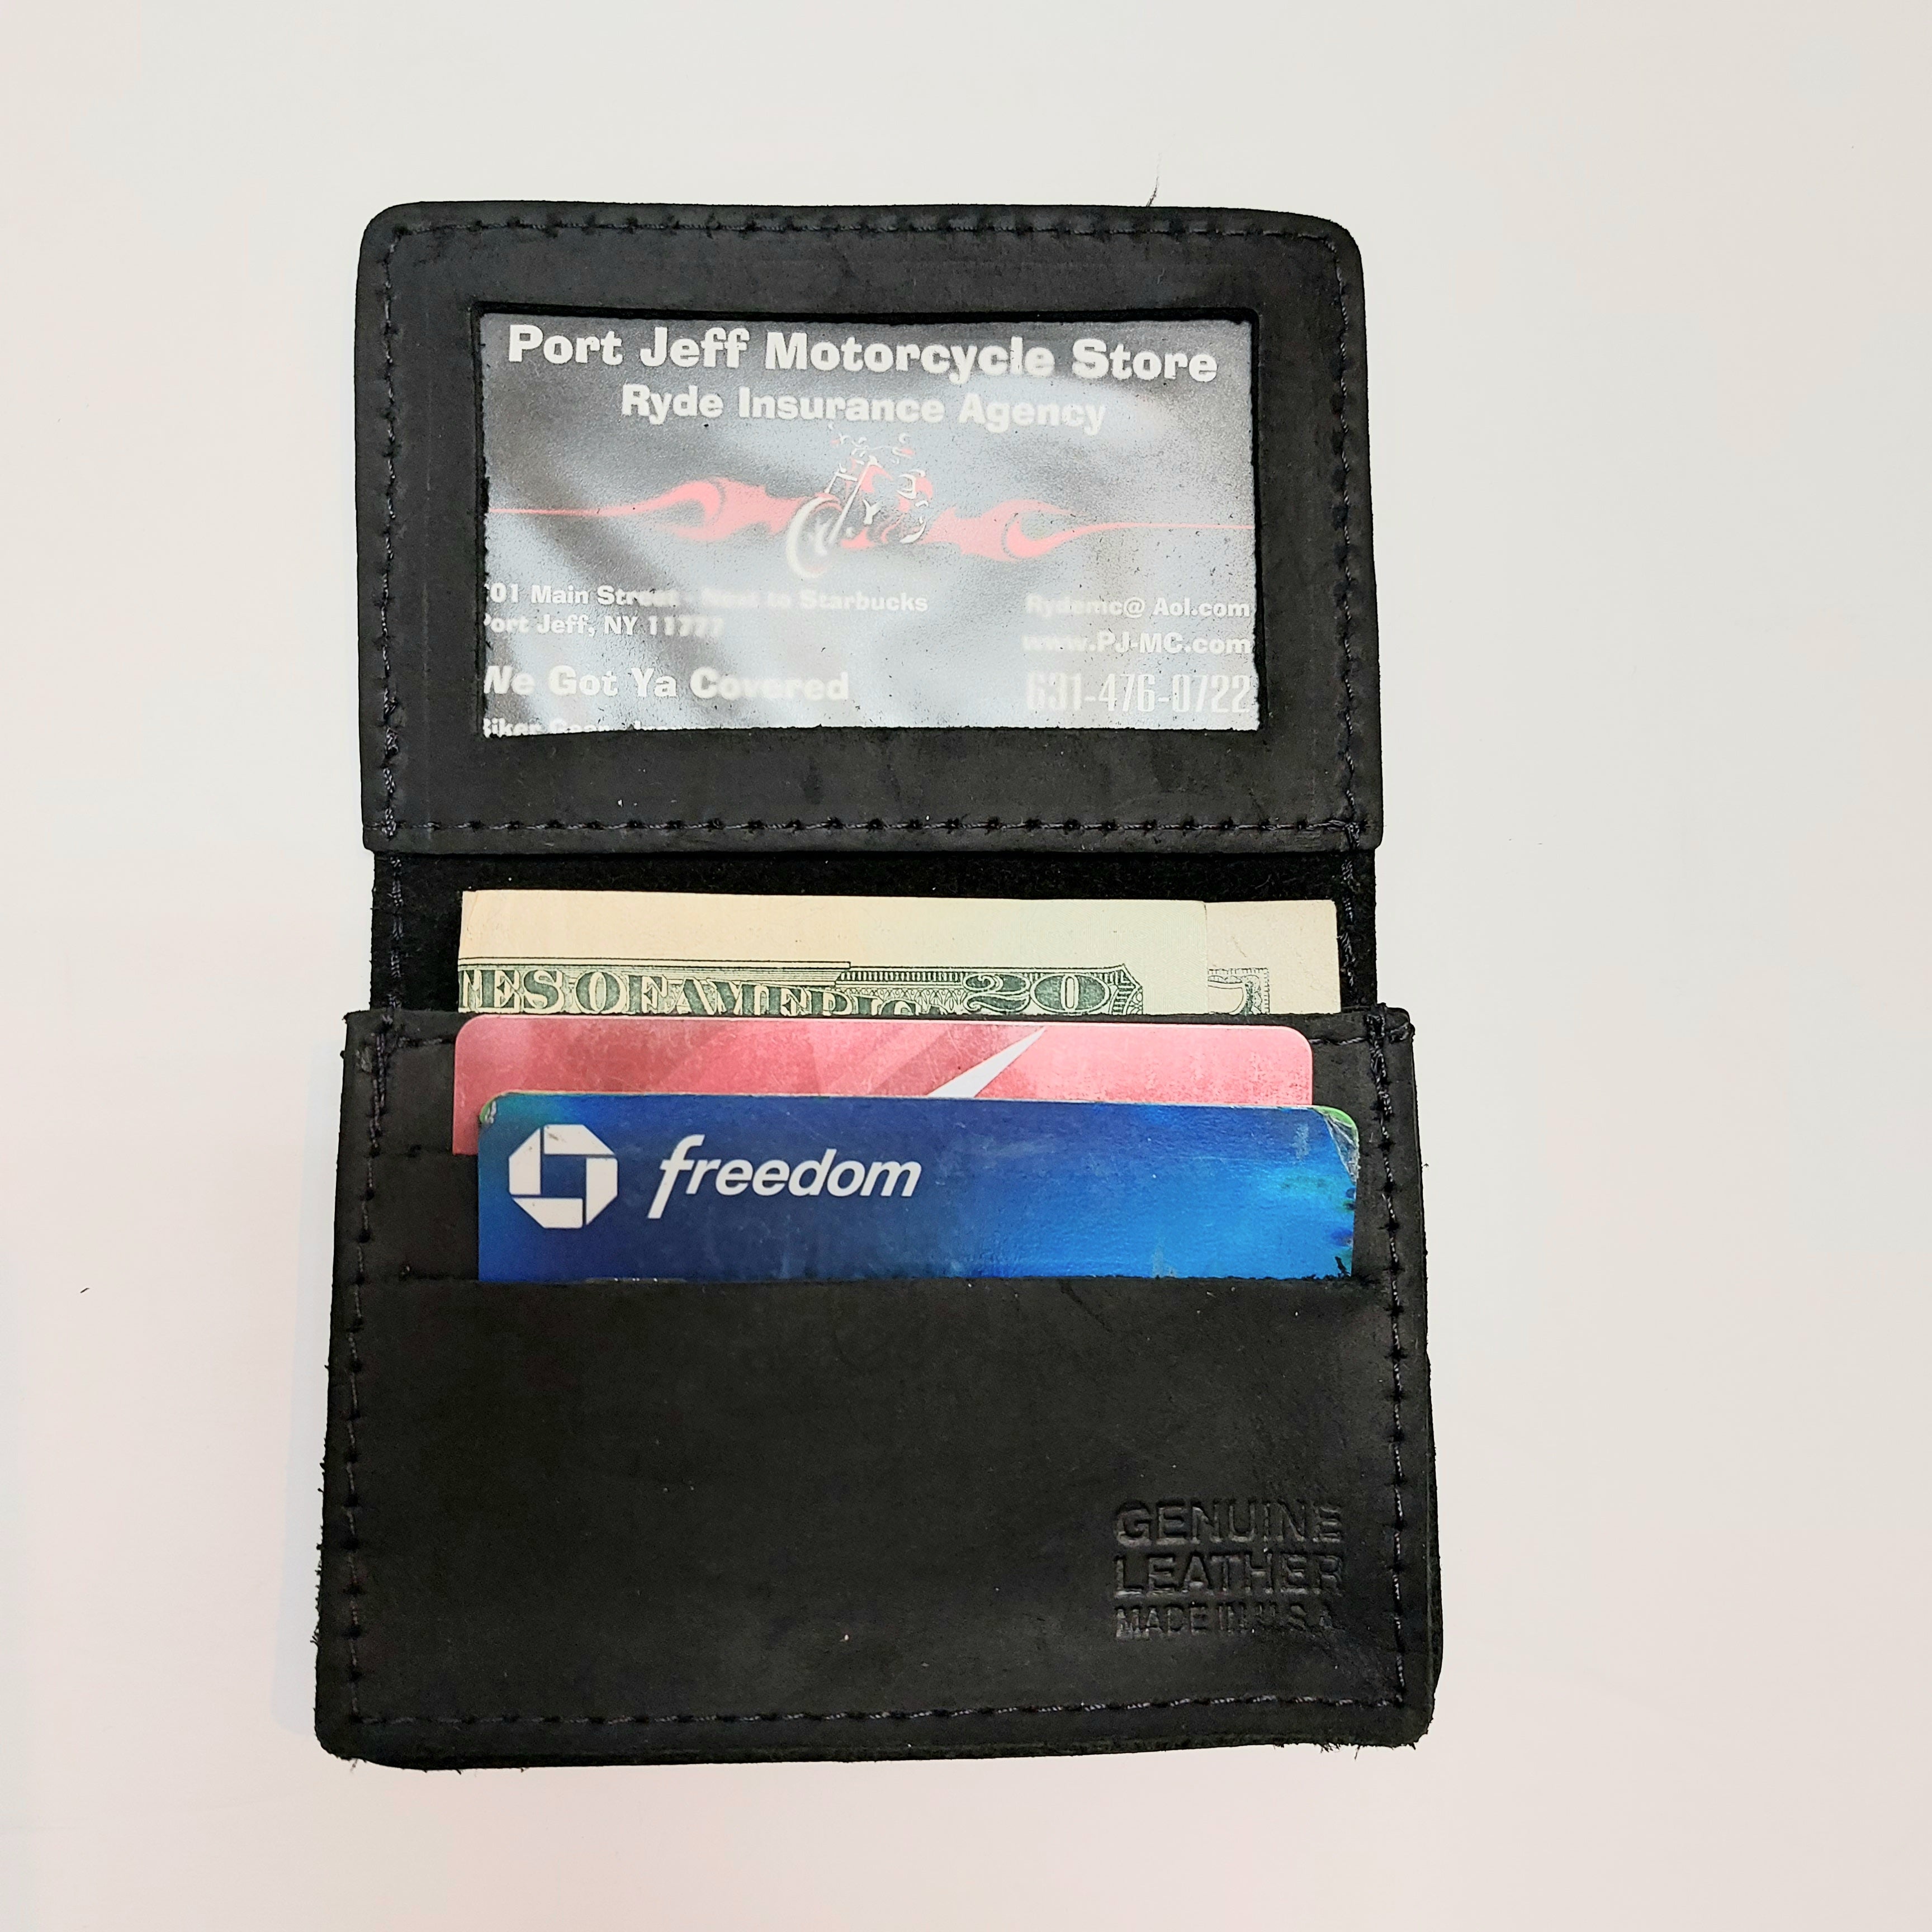 RFID Leather Card Holder with ID and Cash Pocket